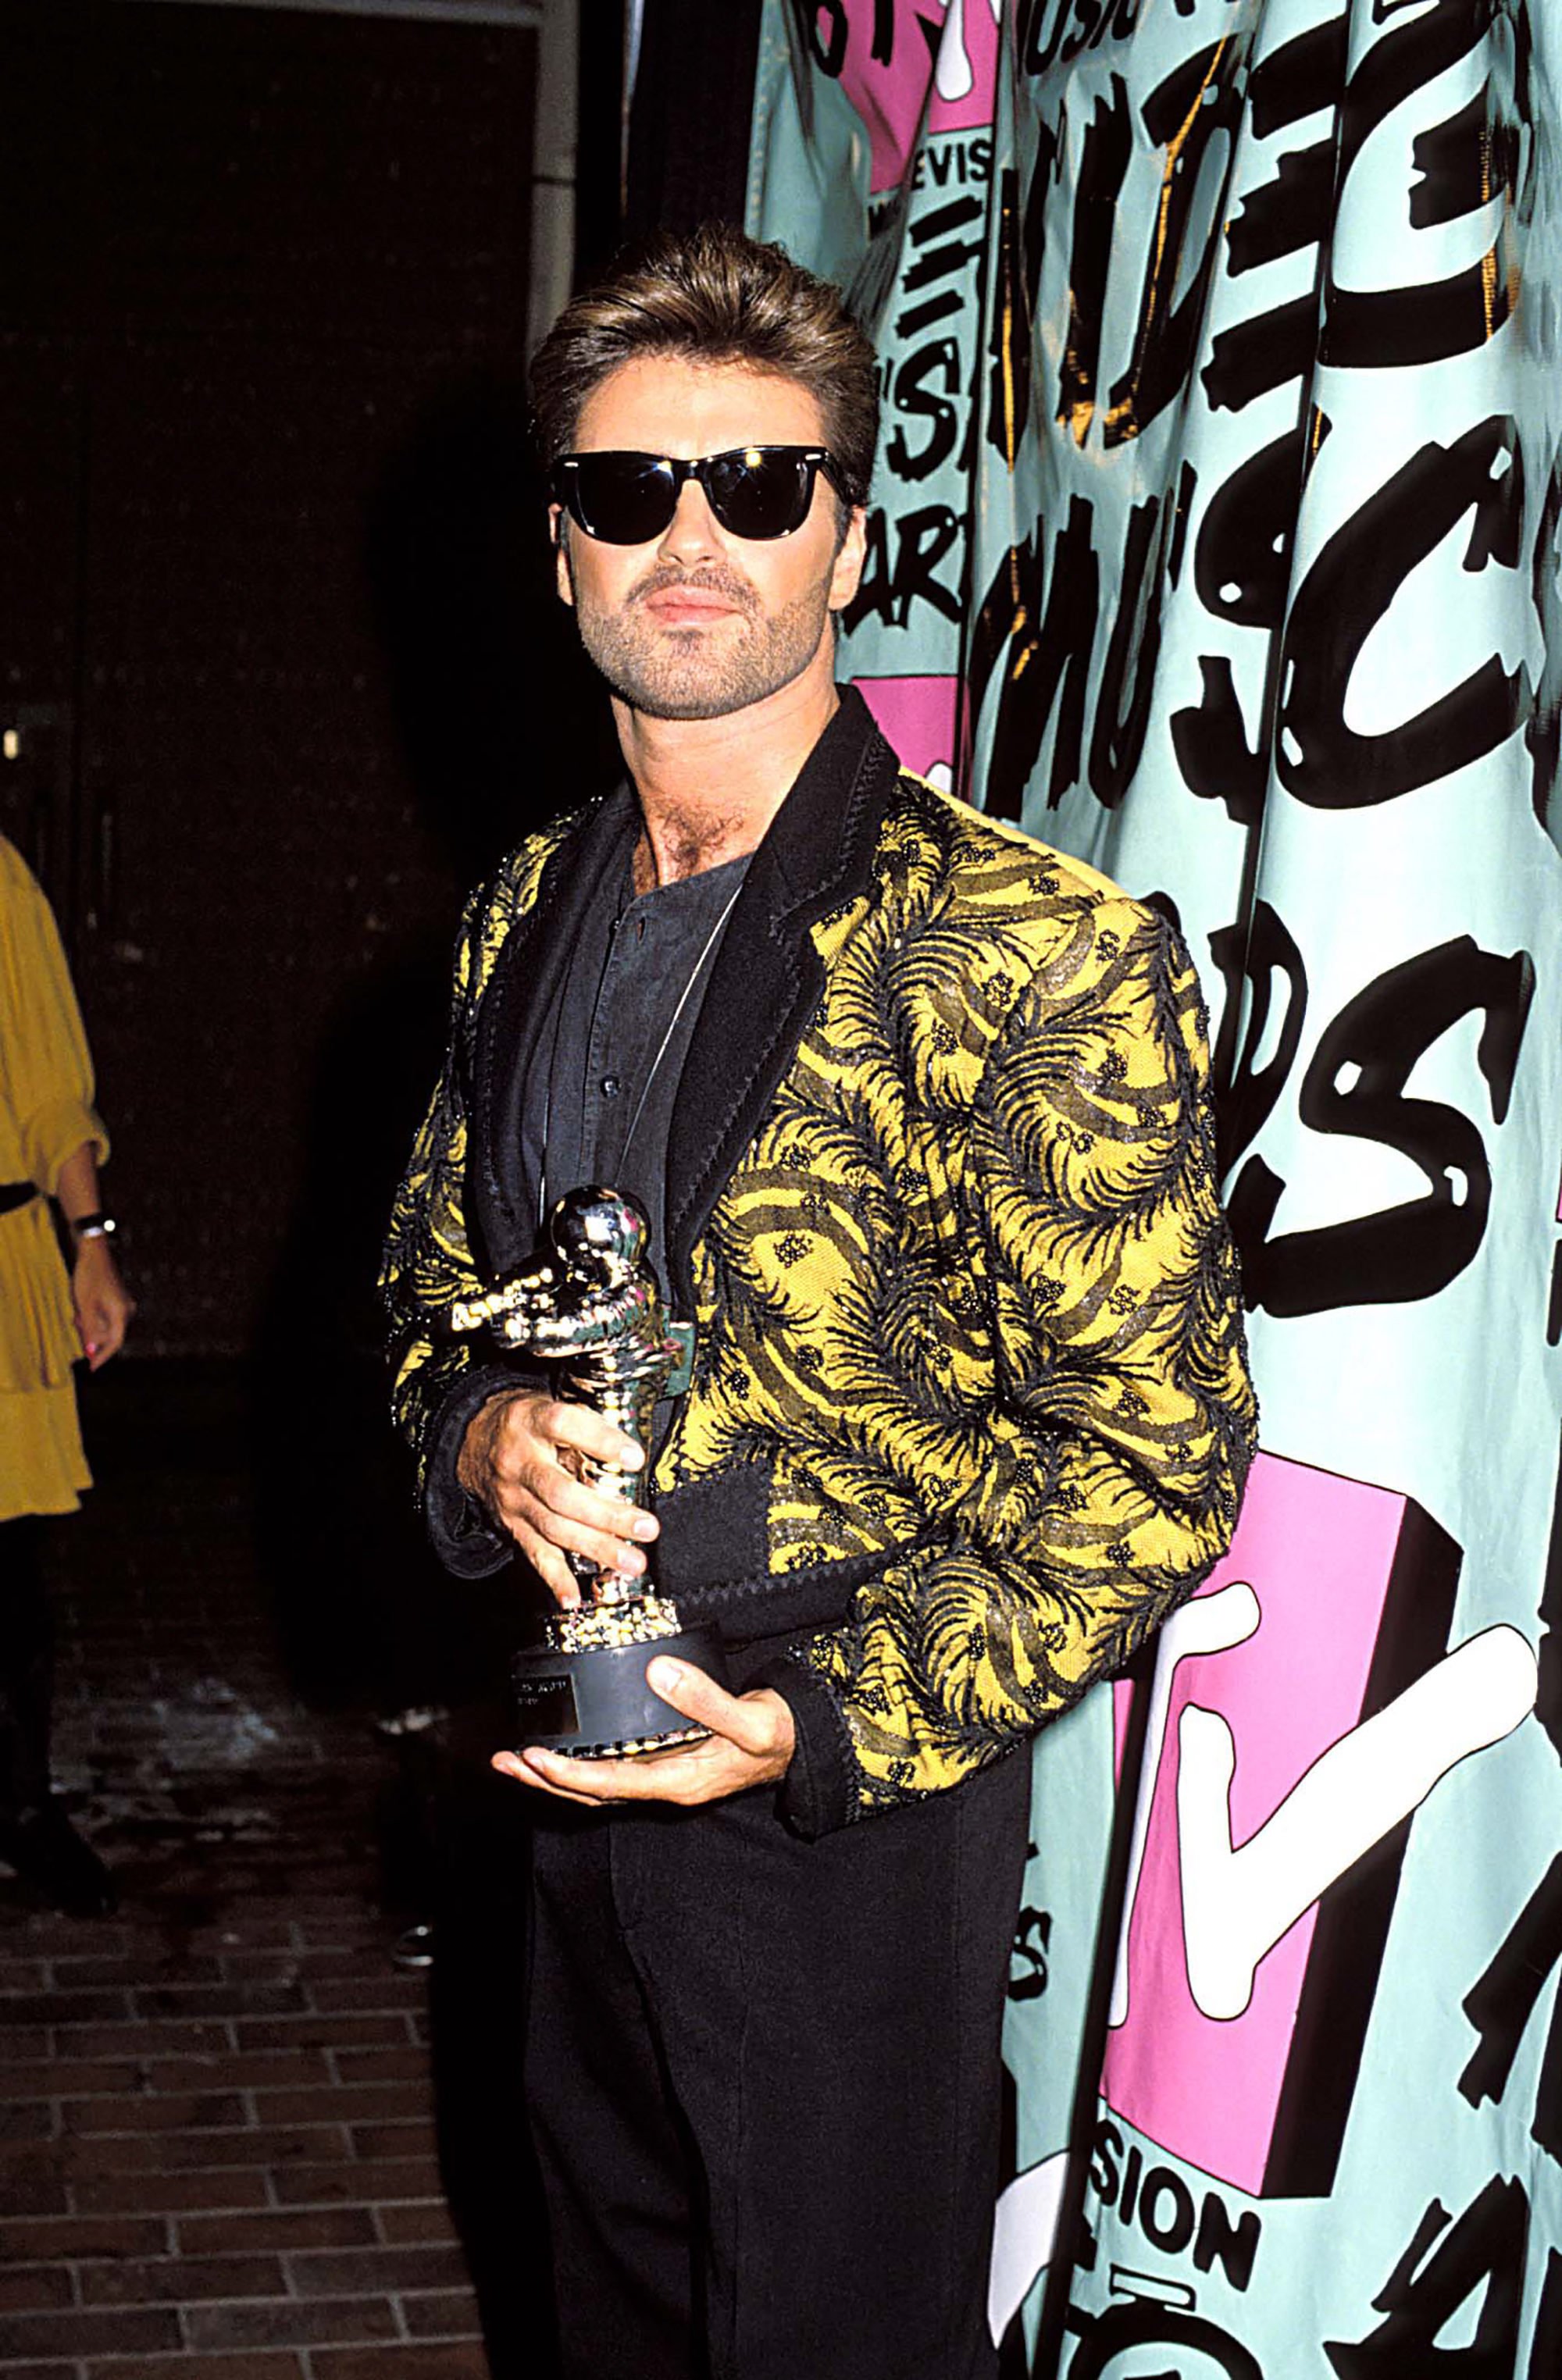 George Michael during the 1989 MTV Video Music Awards in Los Angeles, on Sept. 9, 1989.